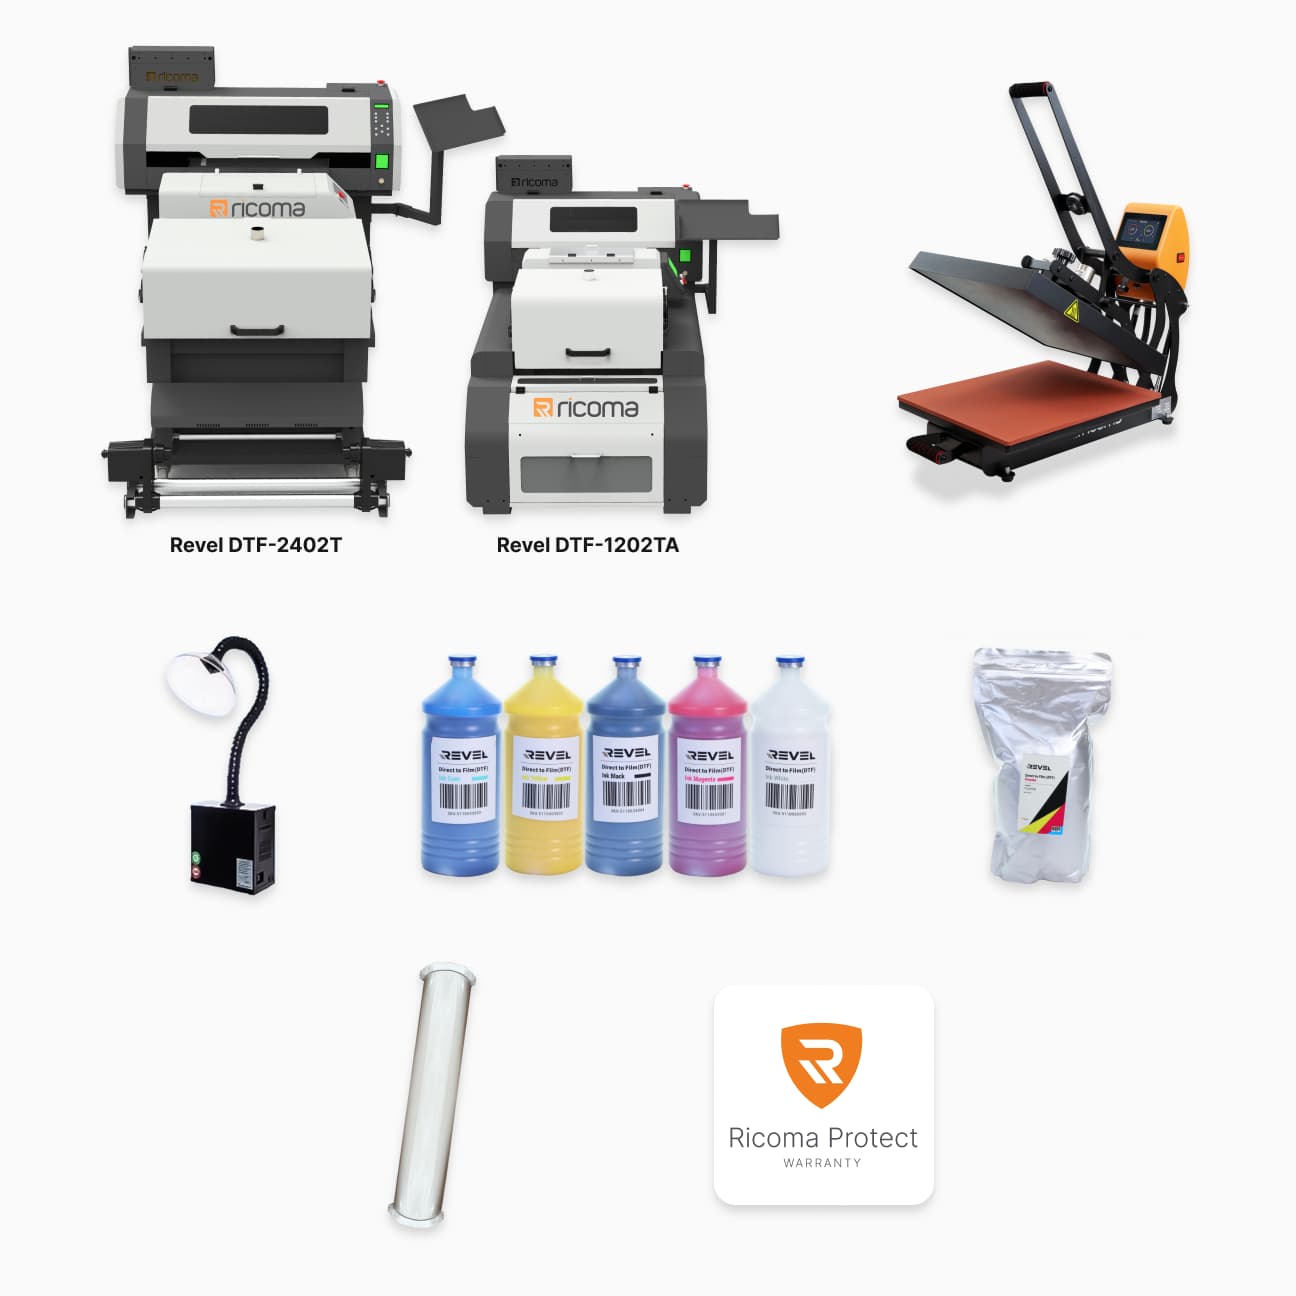 Revel 24&quot; DTF-2402T or Duo 12&quot; DTF-1202TA,Ricoma 16&quot; x 20&quot; Auto Open Flat Heat Press,Purifier to clean the air around the printer,DTF Inks ONE 1L each of C,M,Y,K,W,DTF Adhesive Powder 1kg,DTF-1202TA:  30cm*100m roll,DTF-2402T: 60cm Hot Peel Film 100m roll